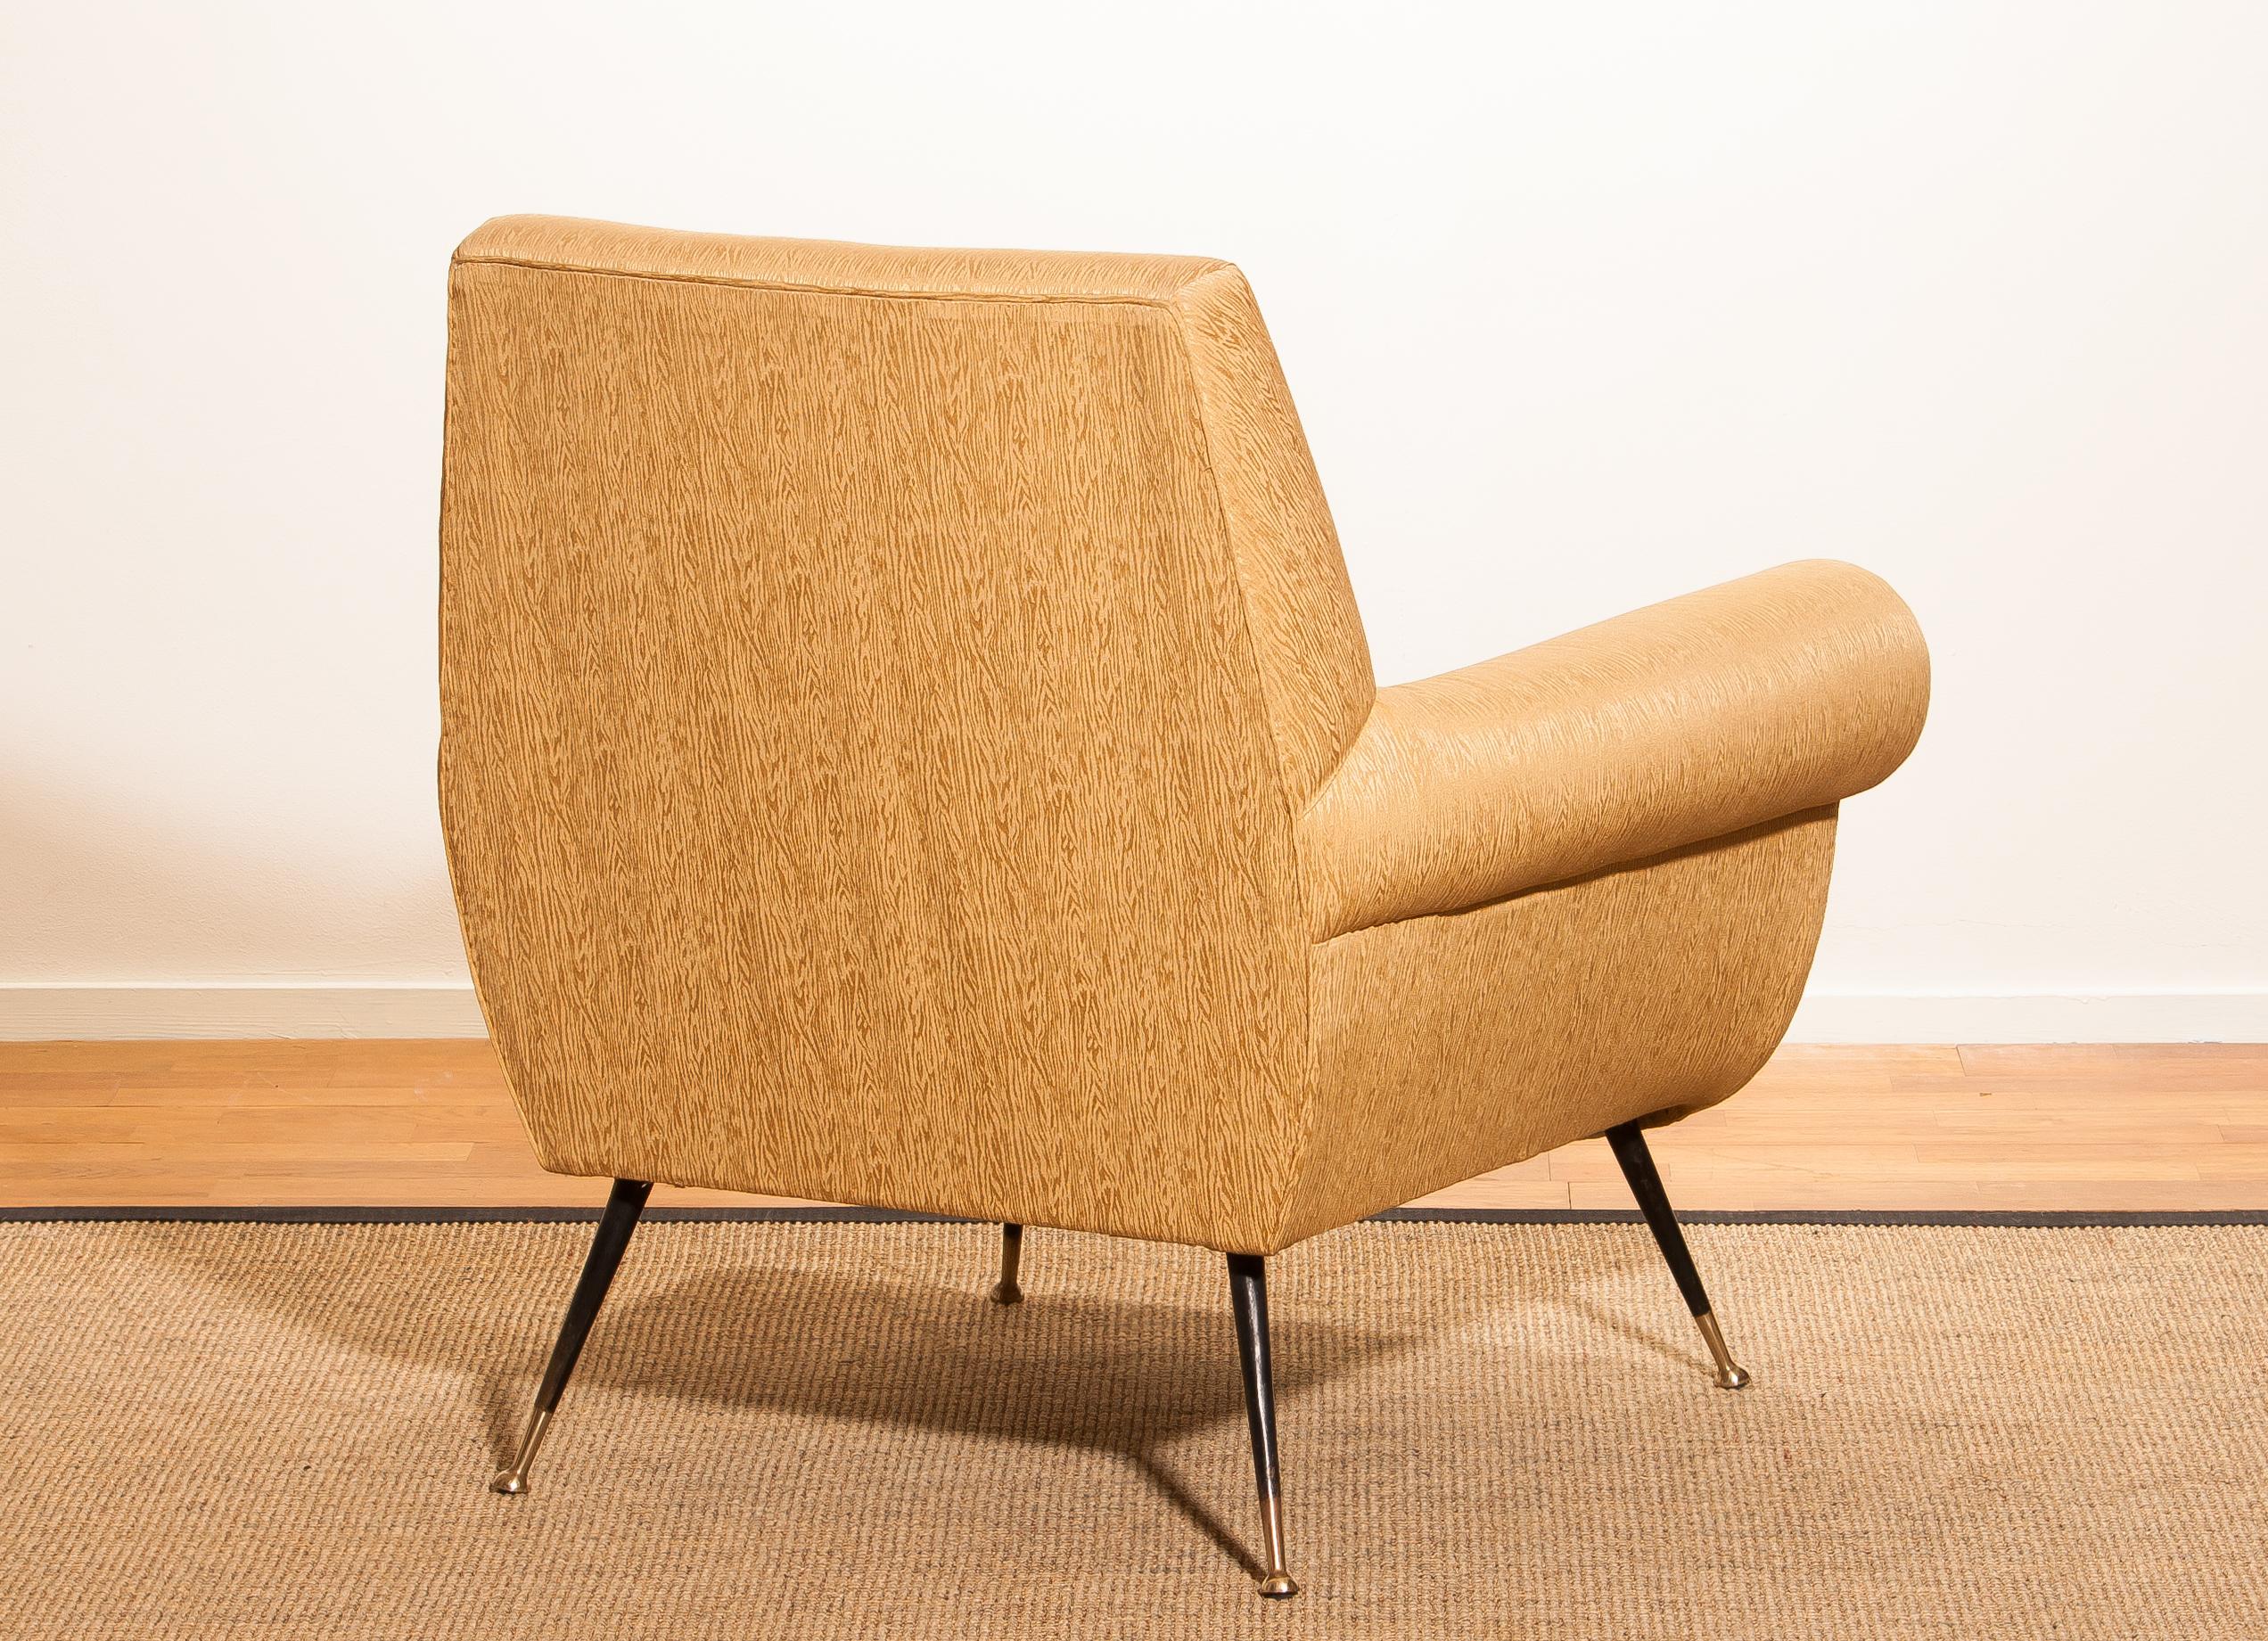 Mid-20th Century 1950s, Brass and Golden Jacquard Set Lounge Chairs by Gigi Radice for Minotti